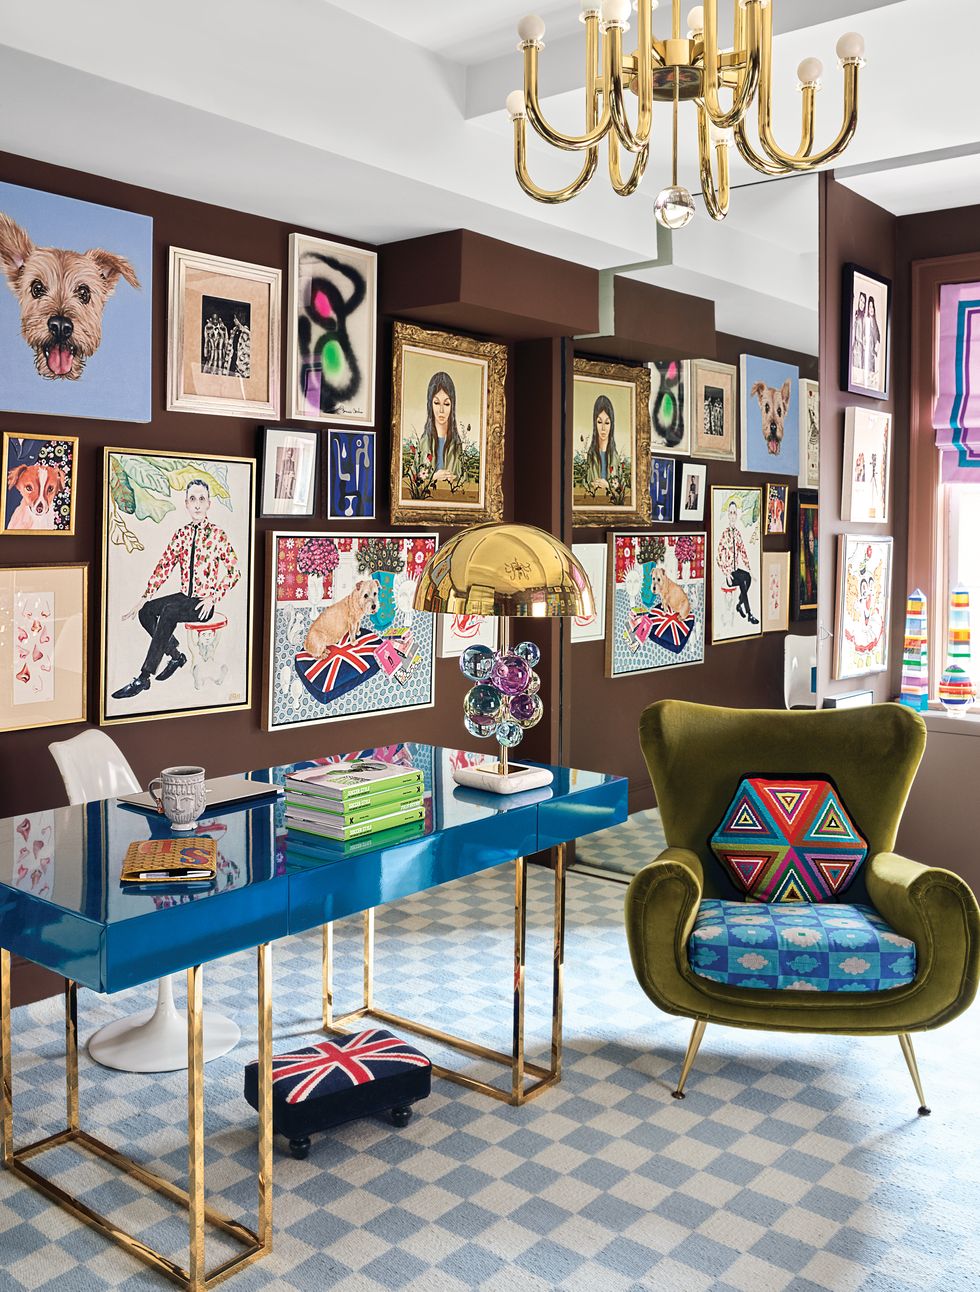 Office with desk, chair, light checkered rug, artwork on walls